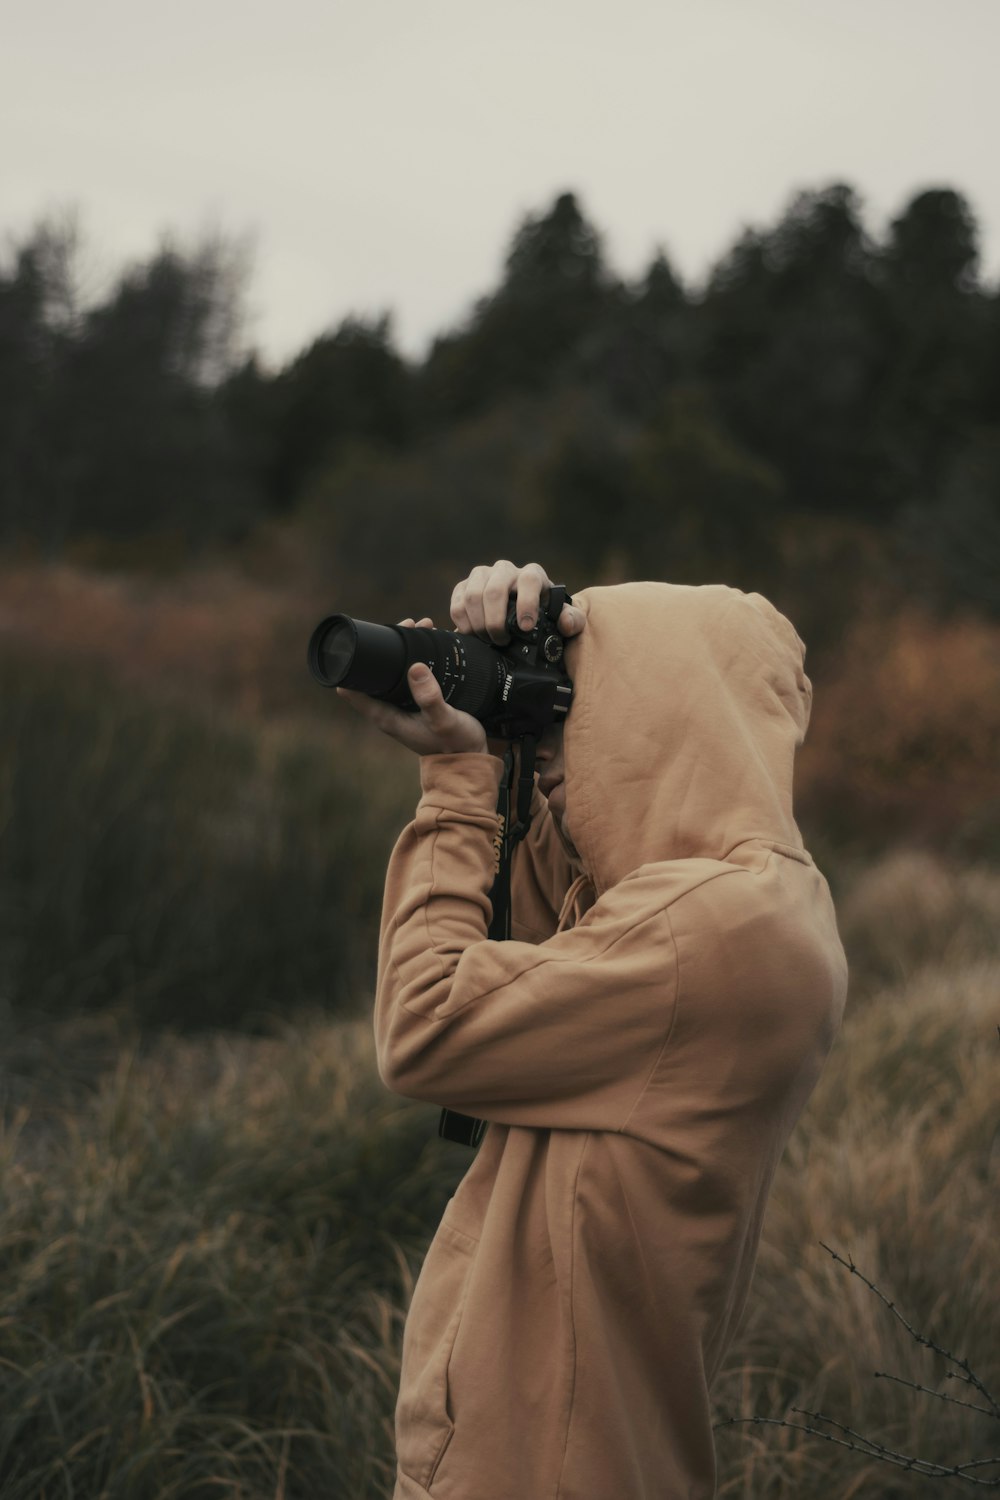 hooded person using a DLSR camera